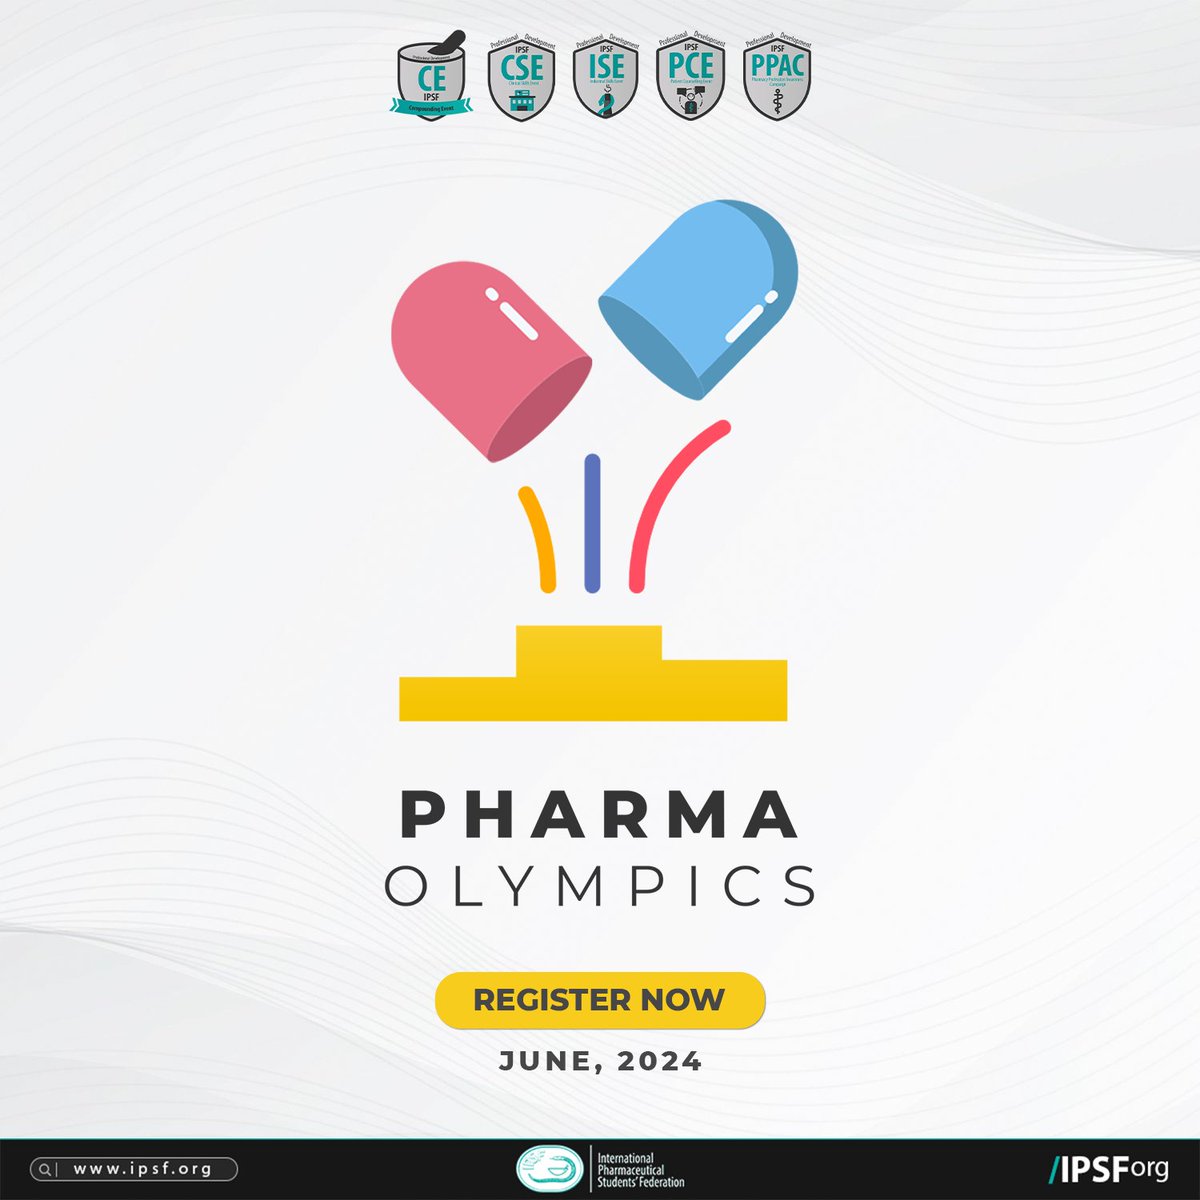 Say hello to the IPSF 2024 Pharma Olympics. This promises to be an exciting period of professional development competitions and webinars spanning all five IPSF Professional Development portfolios.

#PharmaOlympics
#ProfessionalDevelopment
#Vivalapharmacie
#75YearsOfIPSF #IPSForg